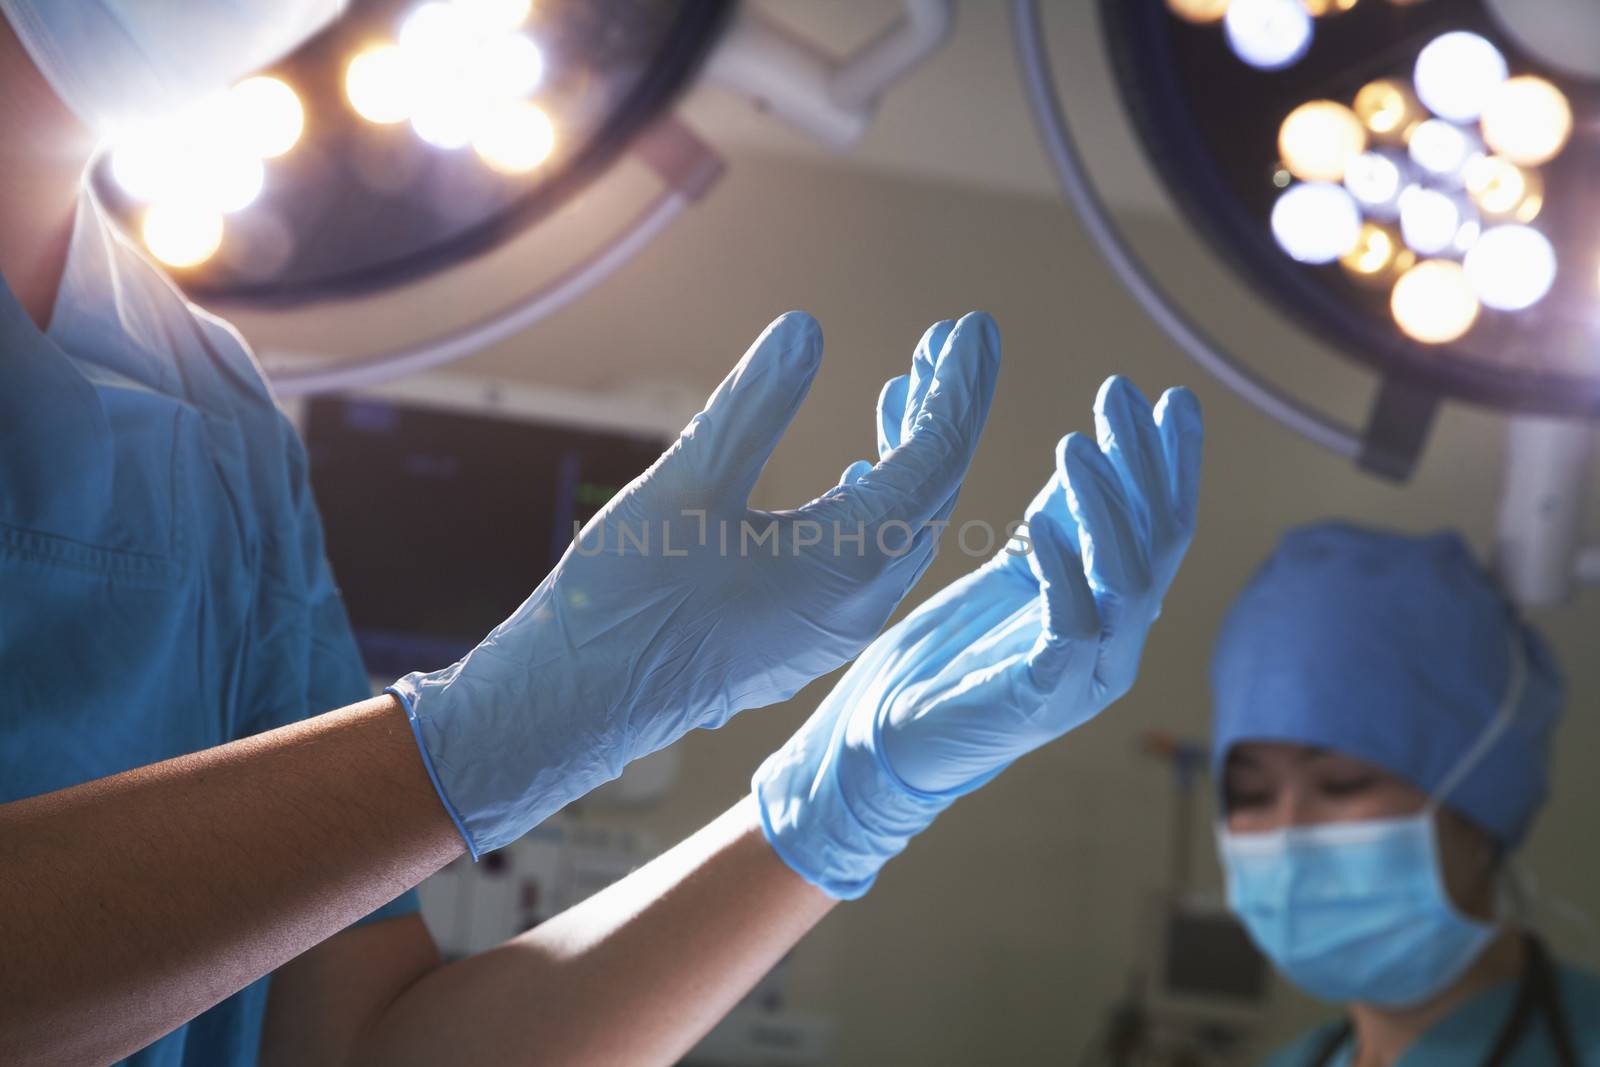 Midsection view of hands in surgical gloves and surgical lights in the operating room  by XiXinXing